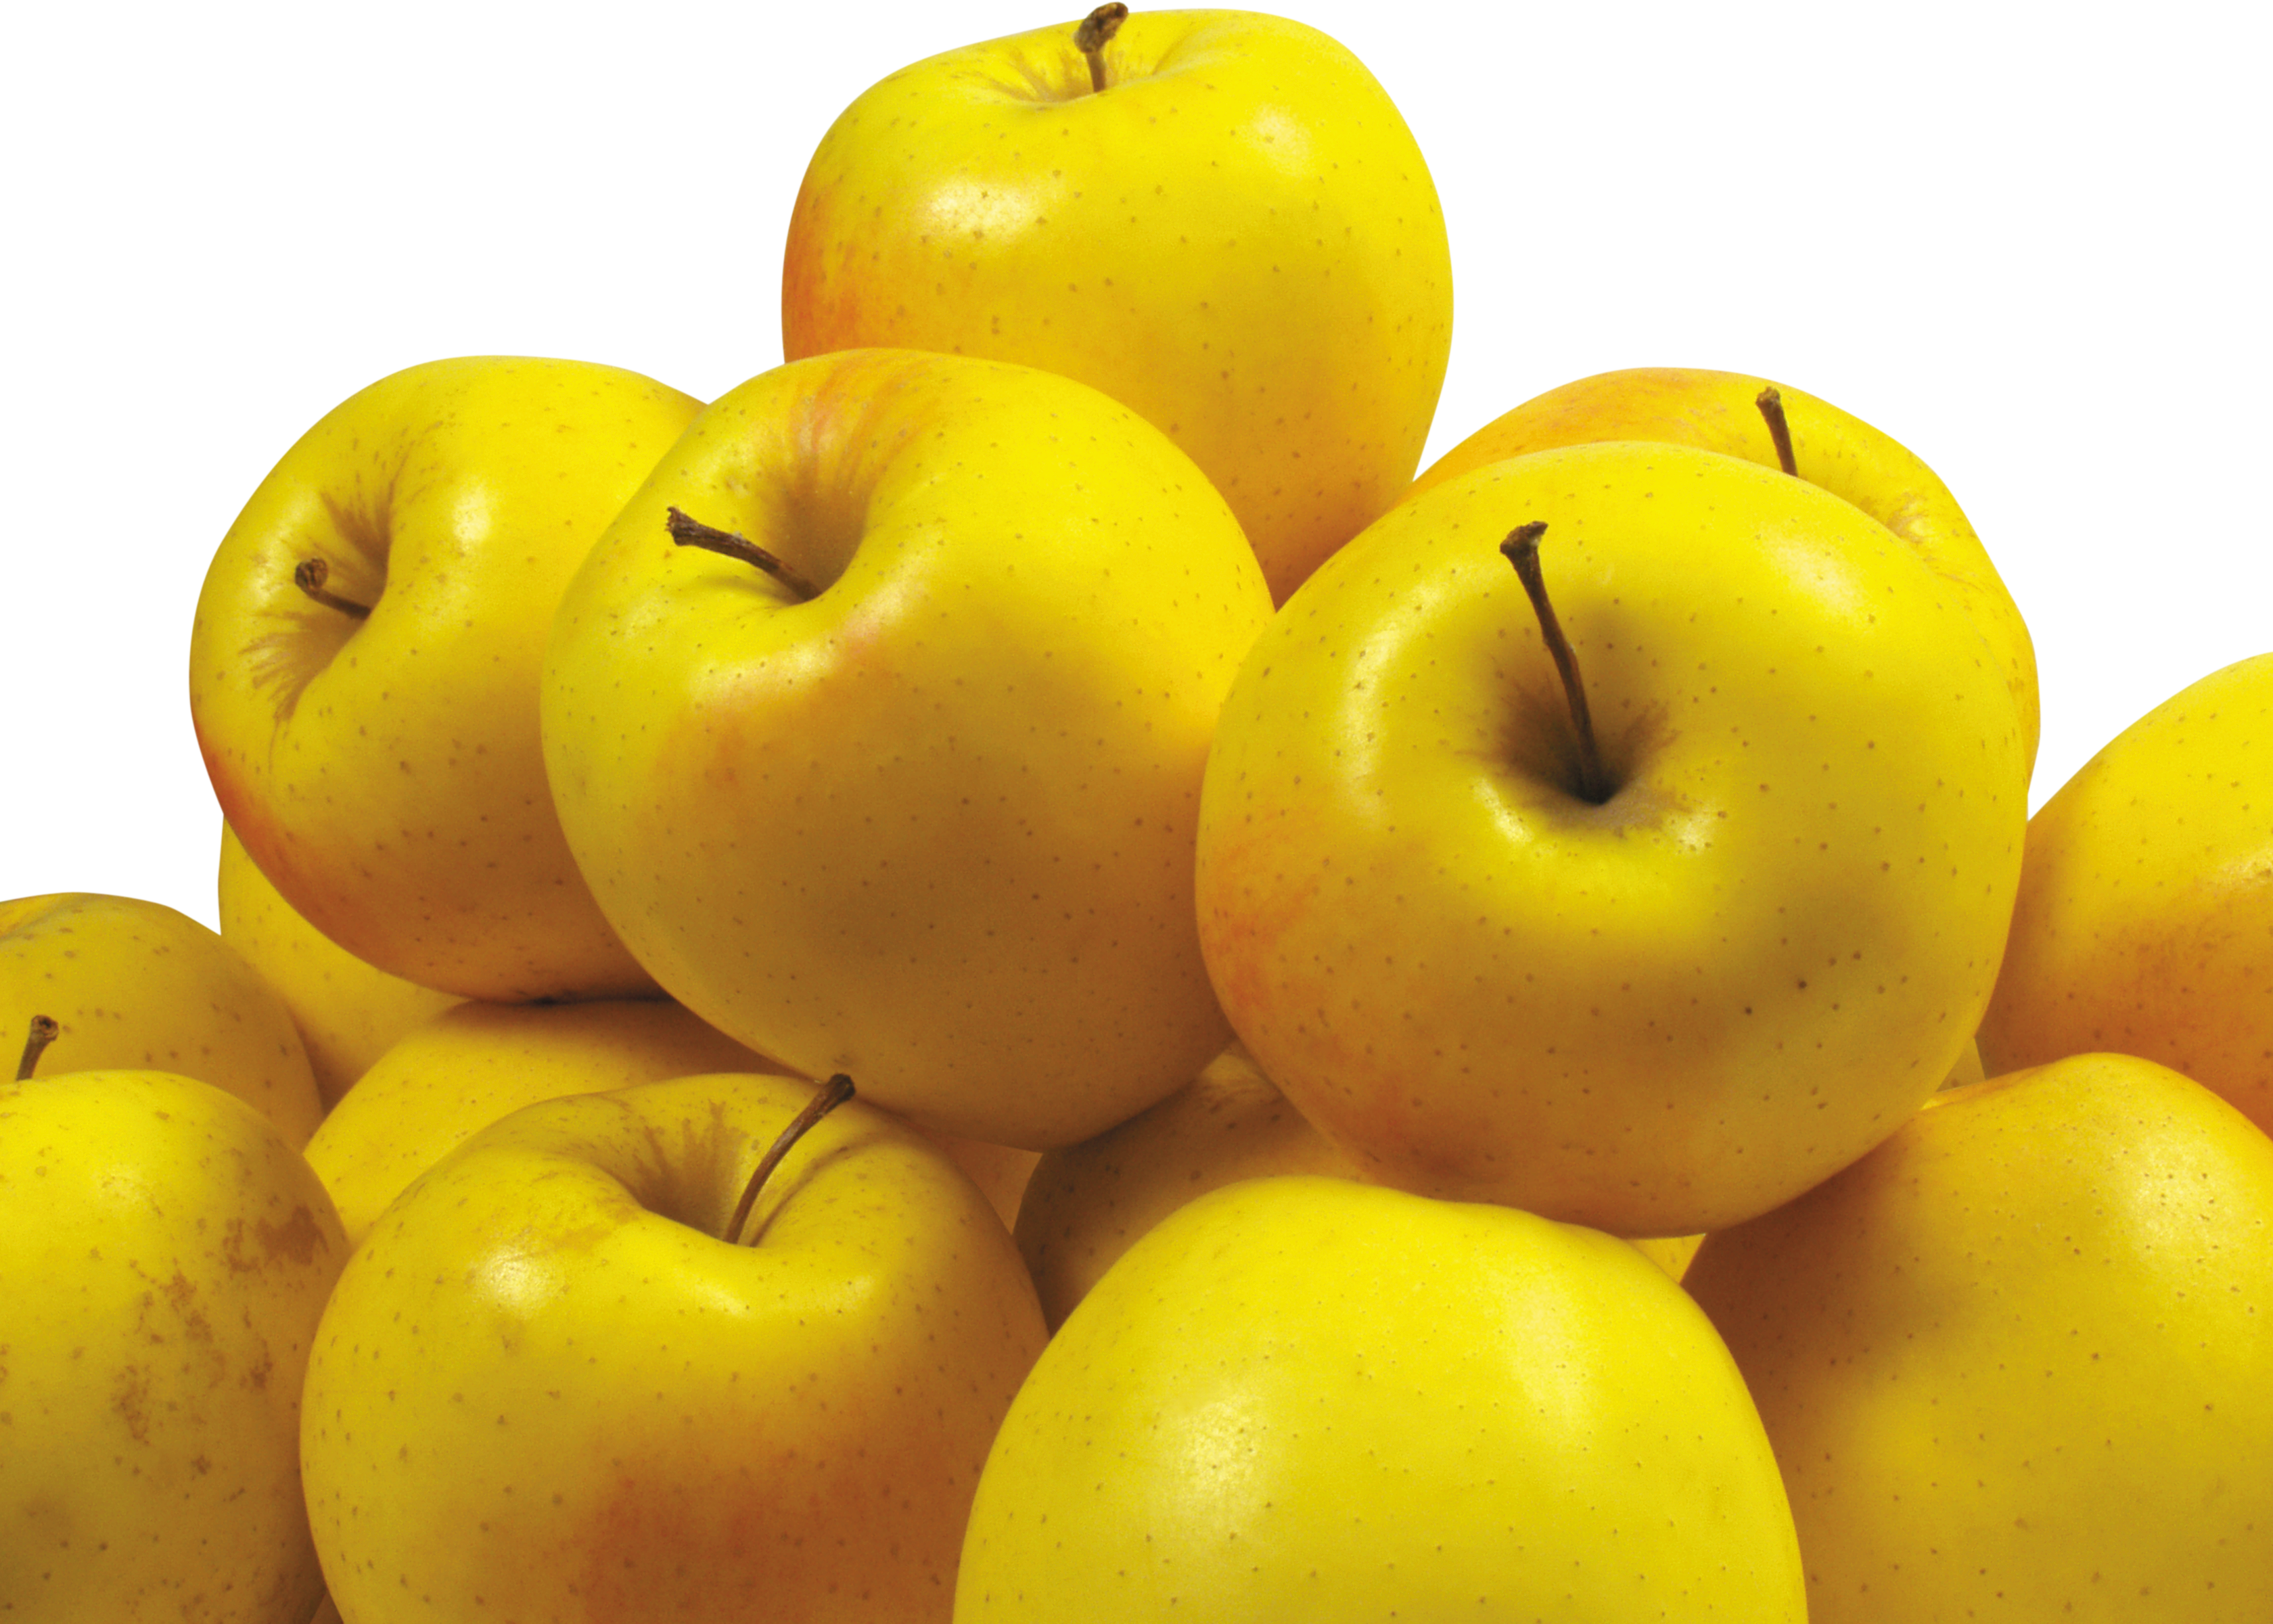 Yellow Apple's PNG Image for Free Download